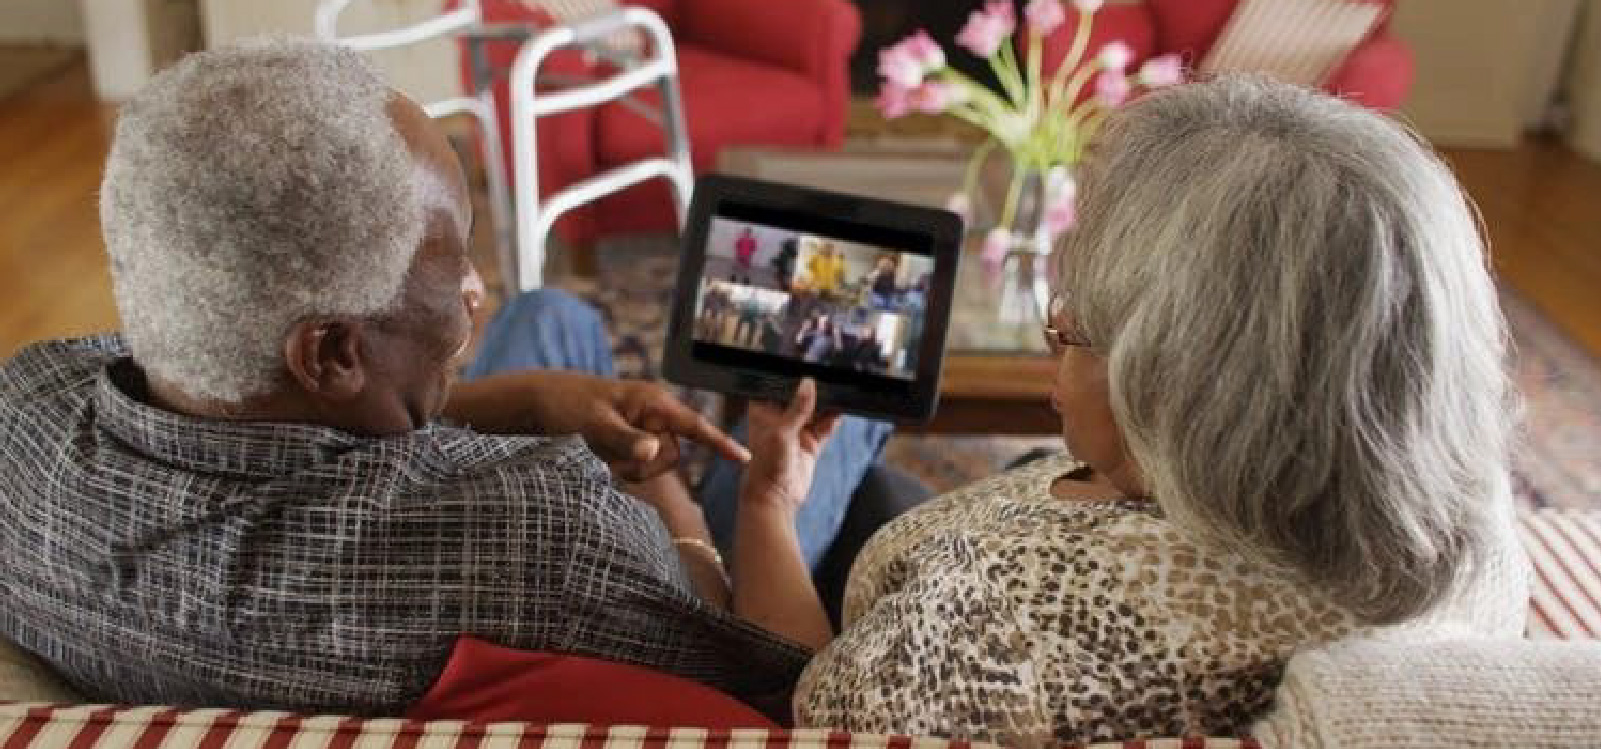 The New Reality for Older Adults: Building Community Digitally